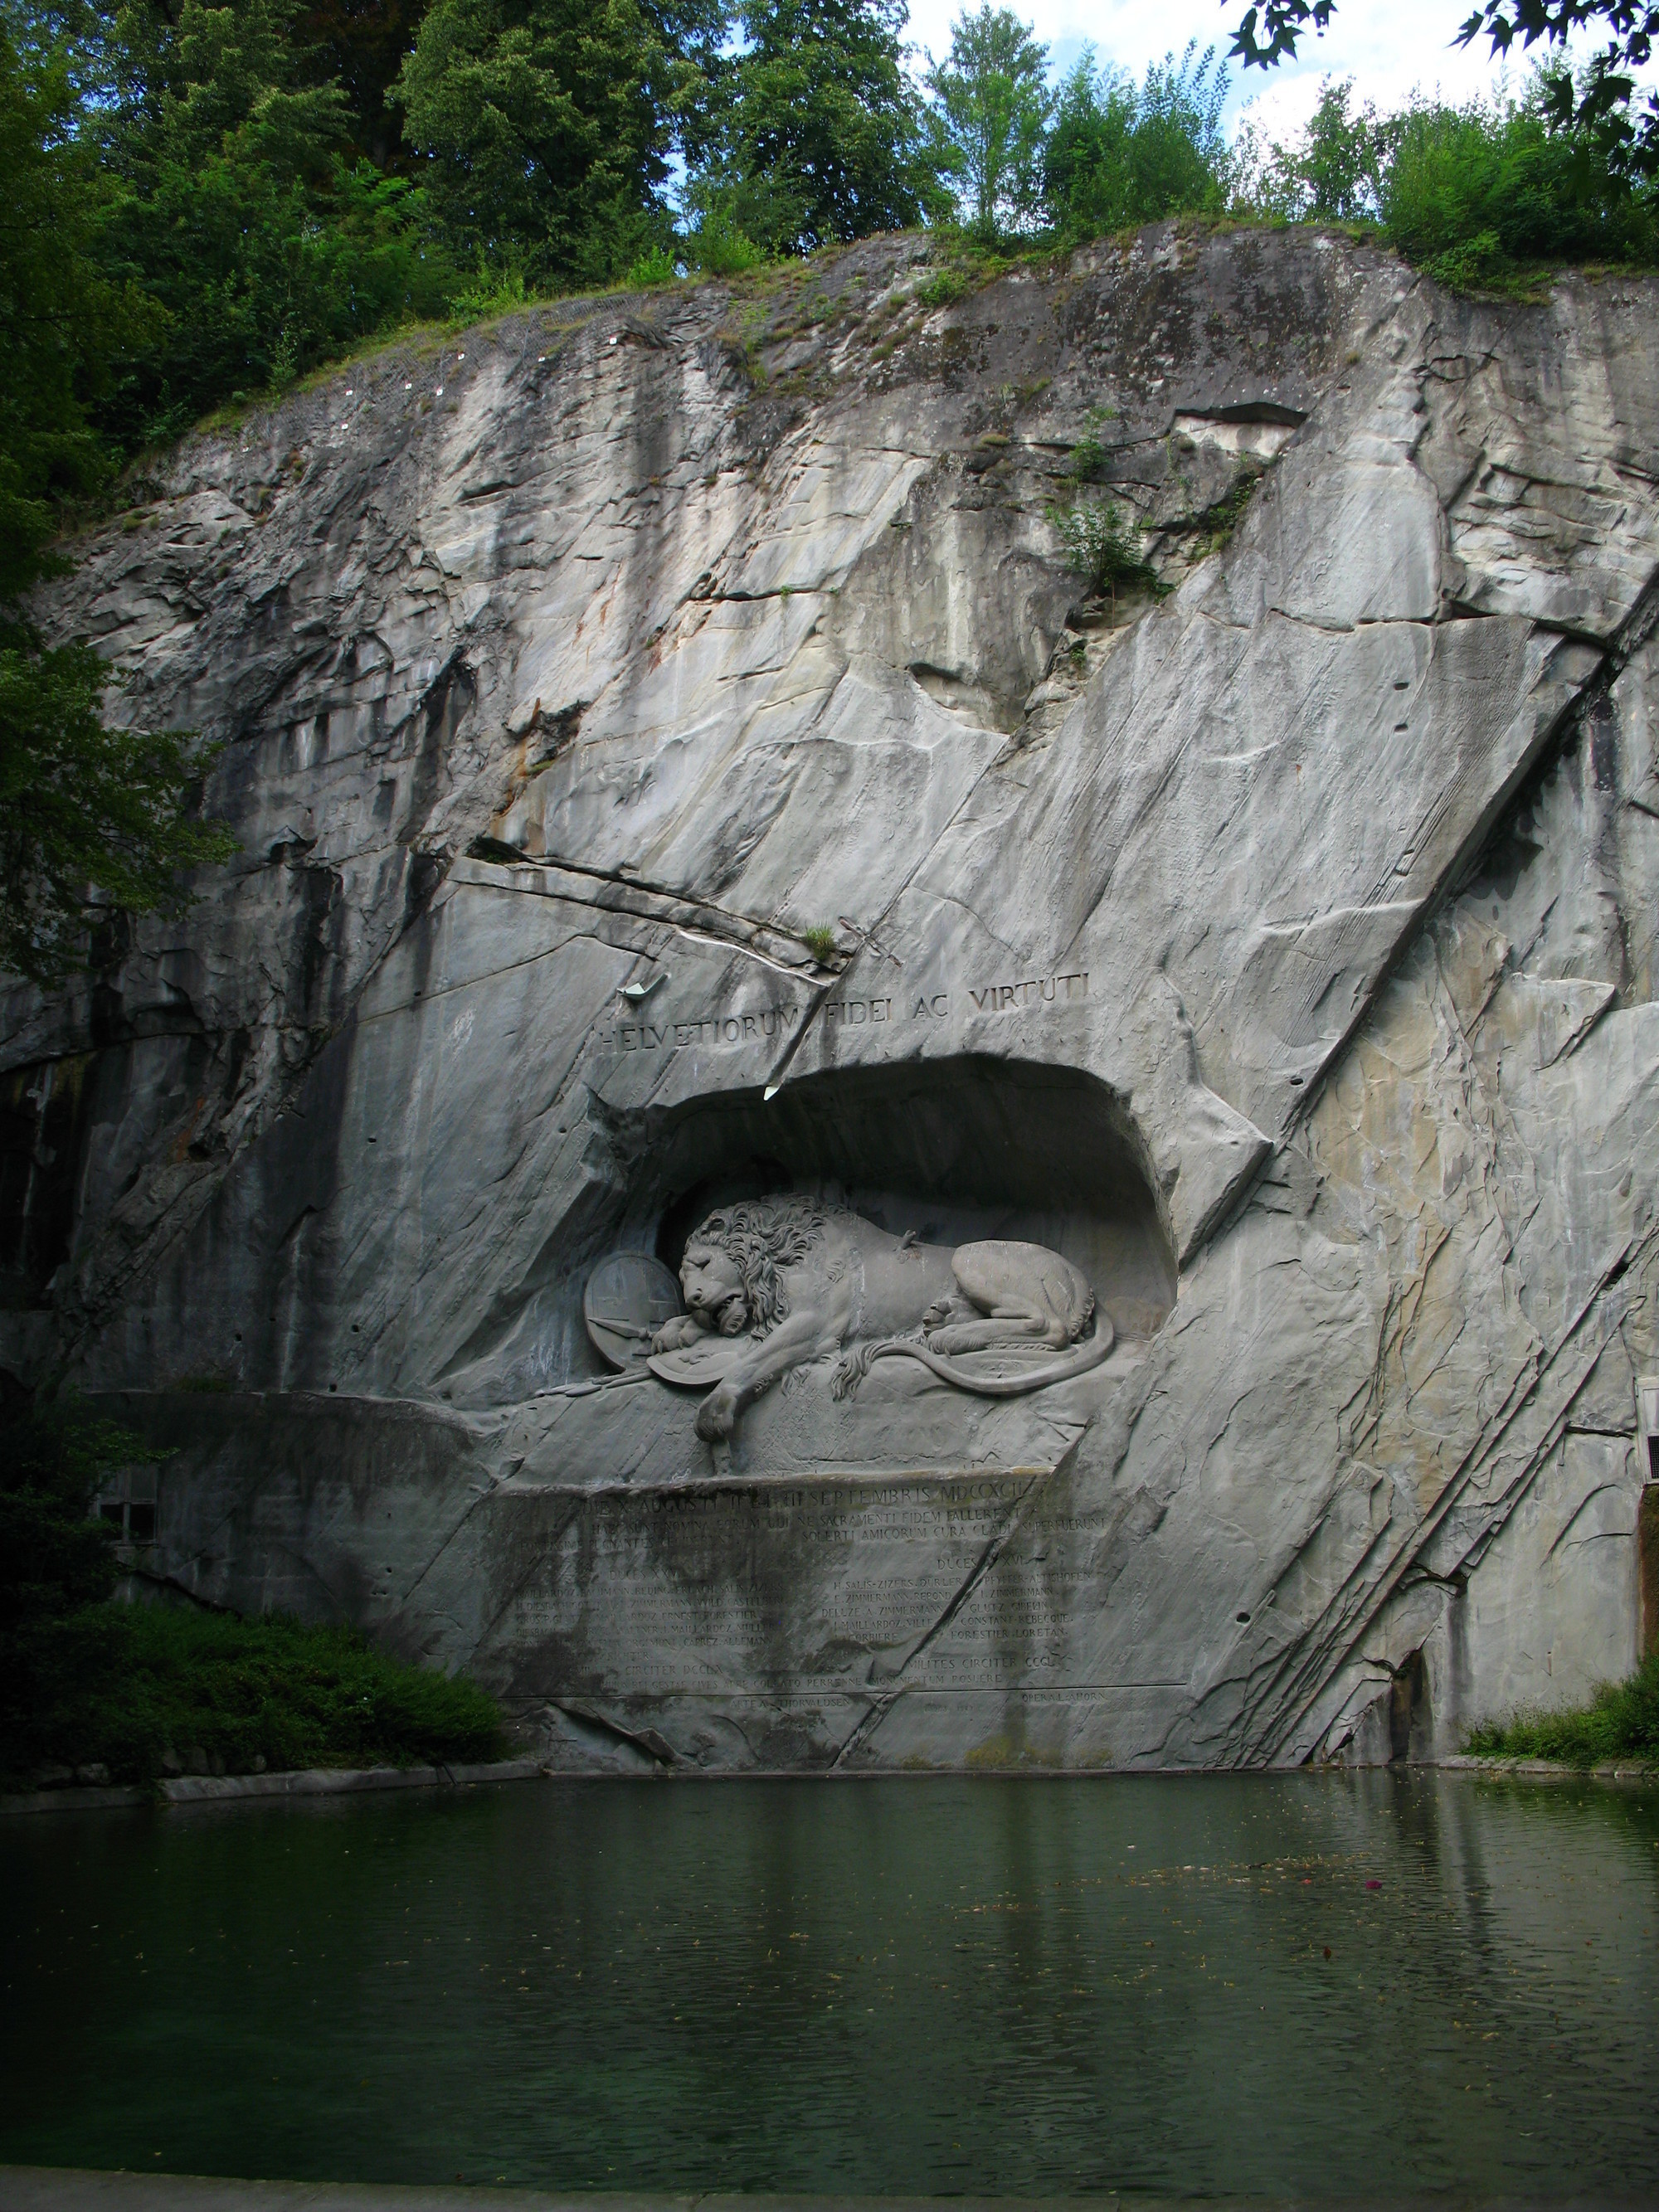 The Lion Monument in Lucerne, Switzerland, commemorates the Swiss Guards who were massacred during the French Revolution.